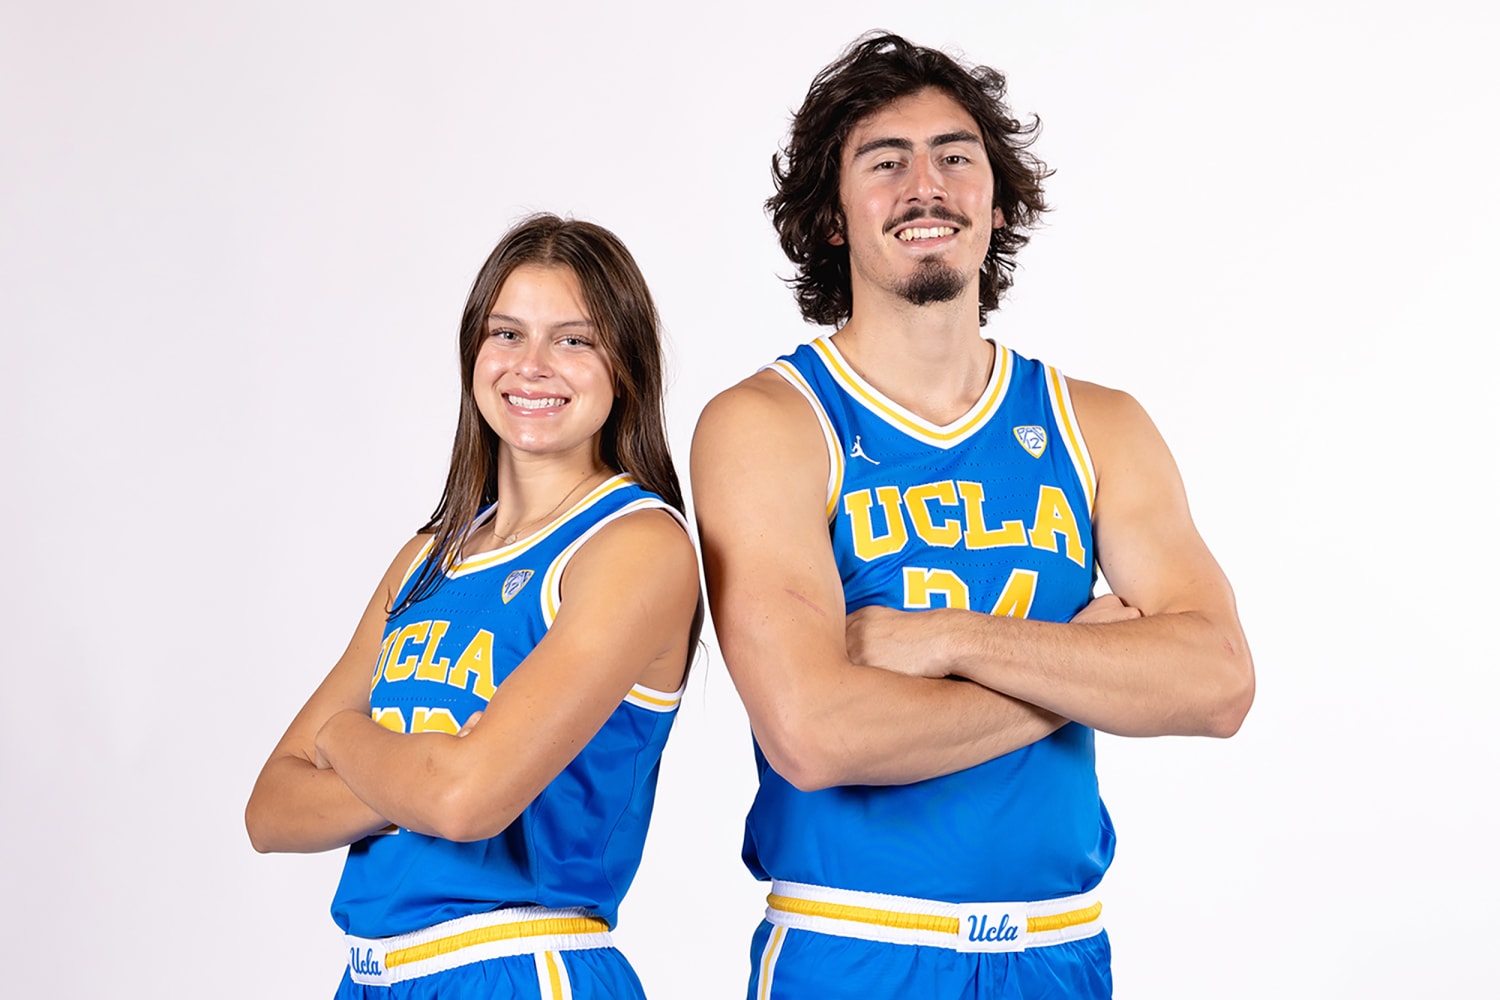 UCLA brother and sister make March Madness a proud family moment